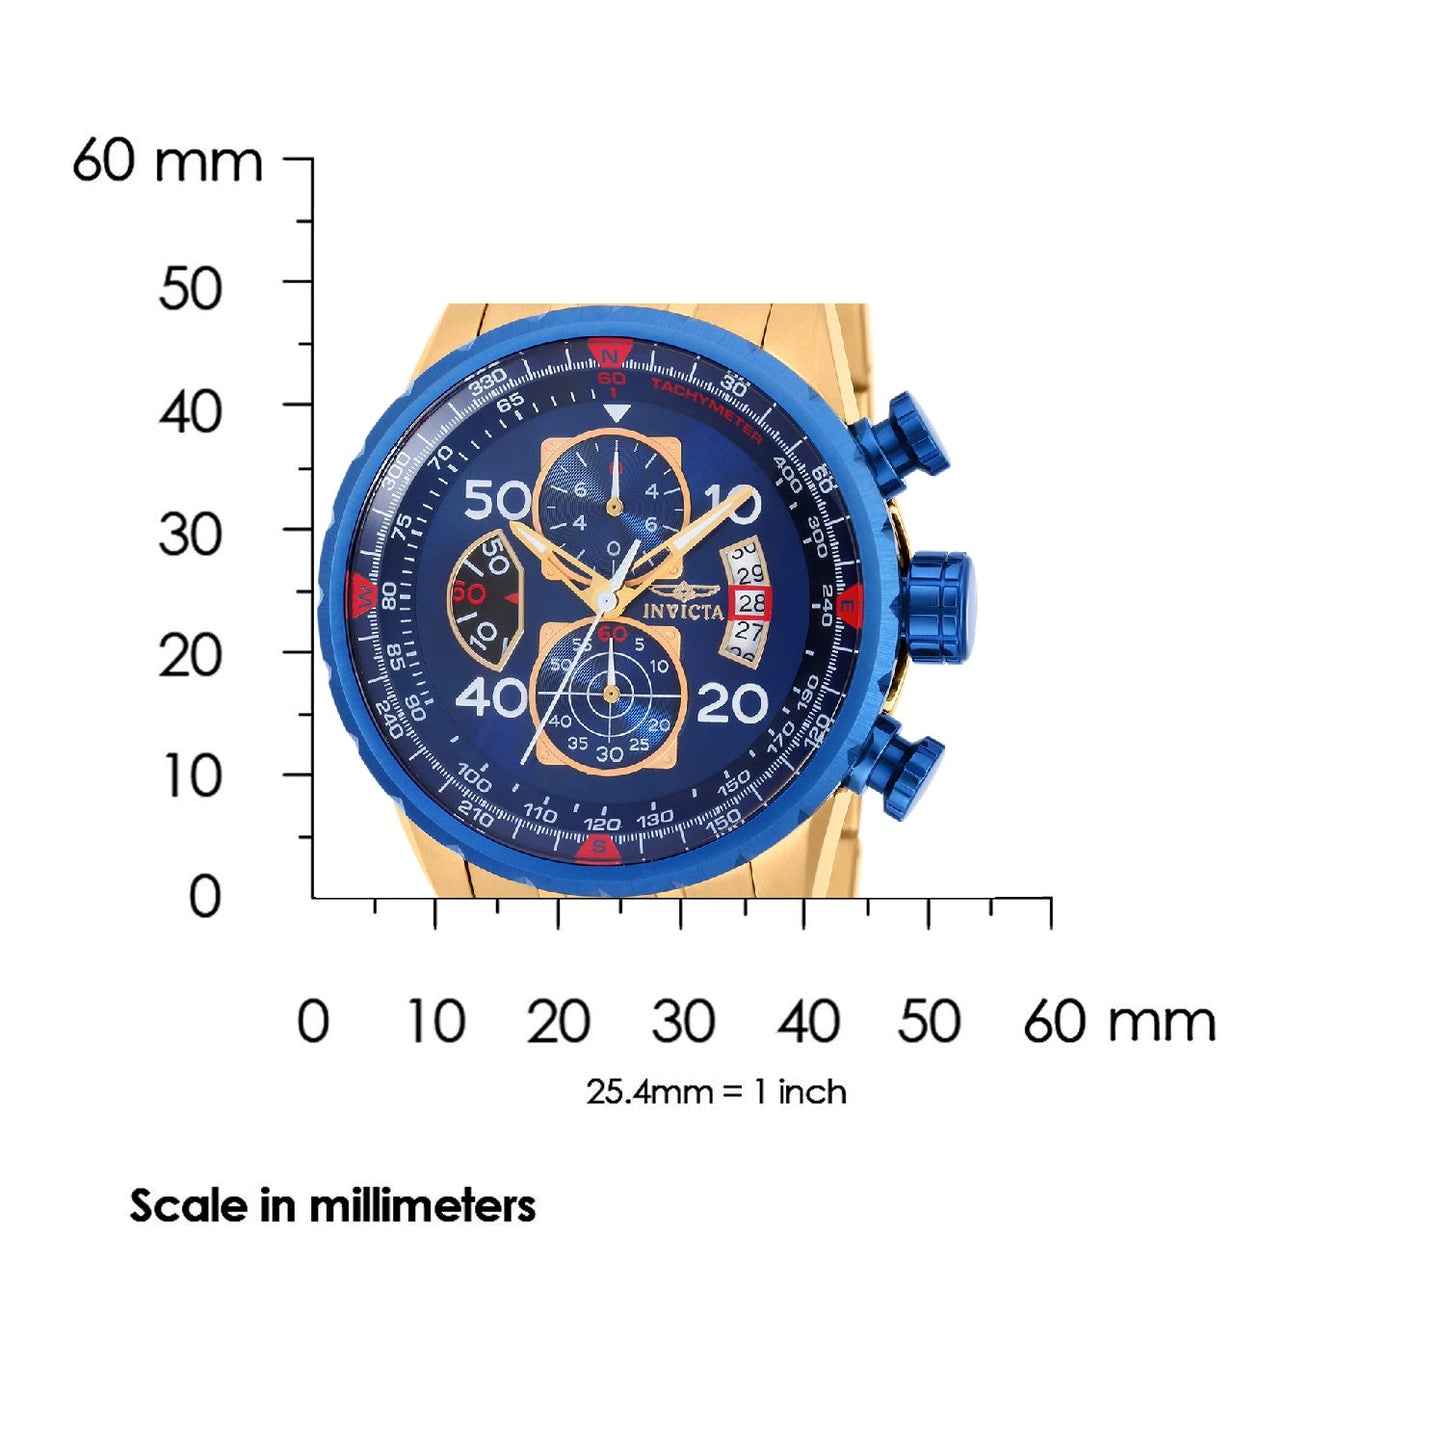 Invicta Aviator 19173 gold-tone watch with blue chronograph dial and bracelet scale view